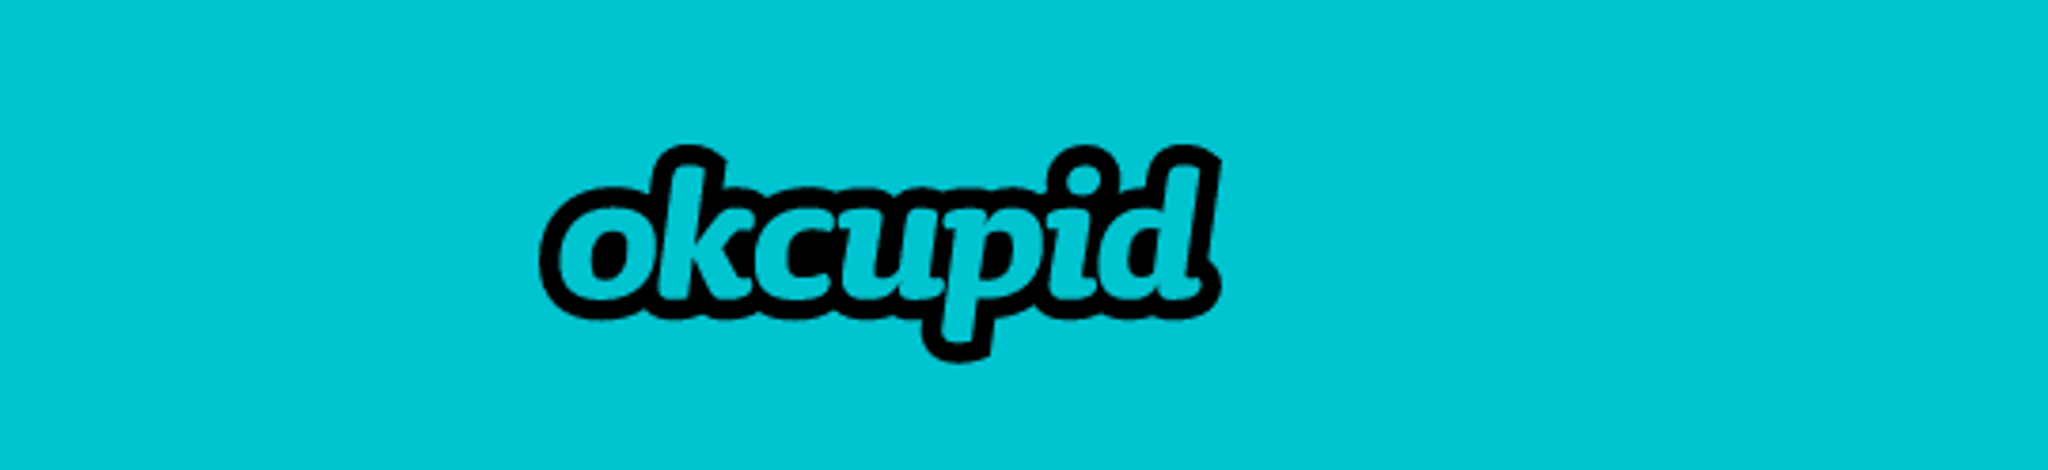 okcupid logo, an online hookup site for plus size people